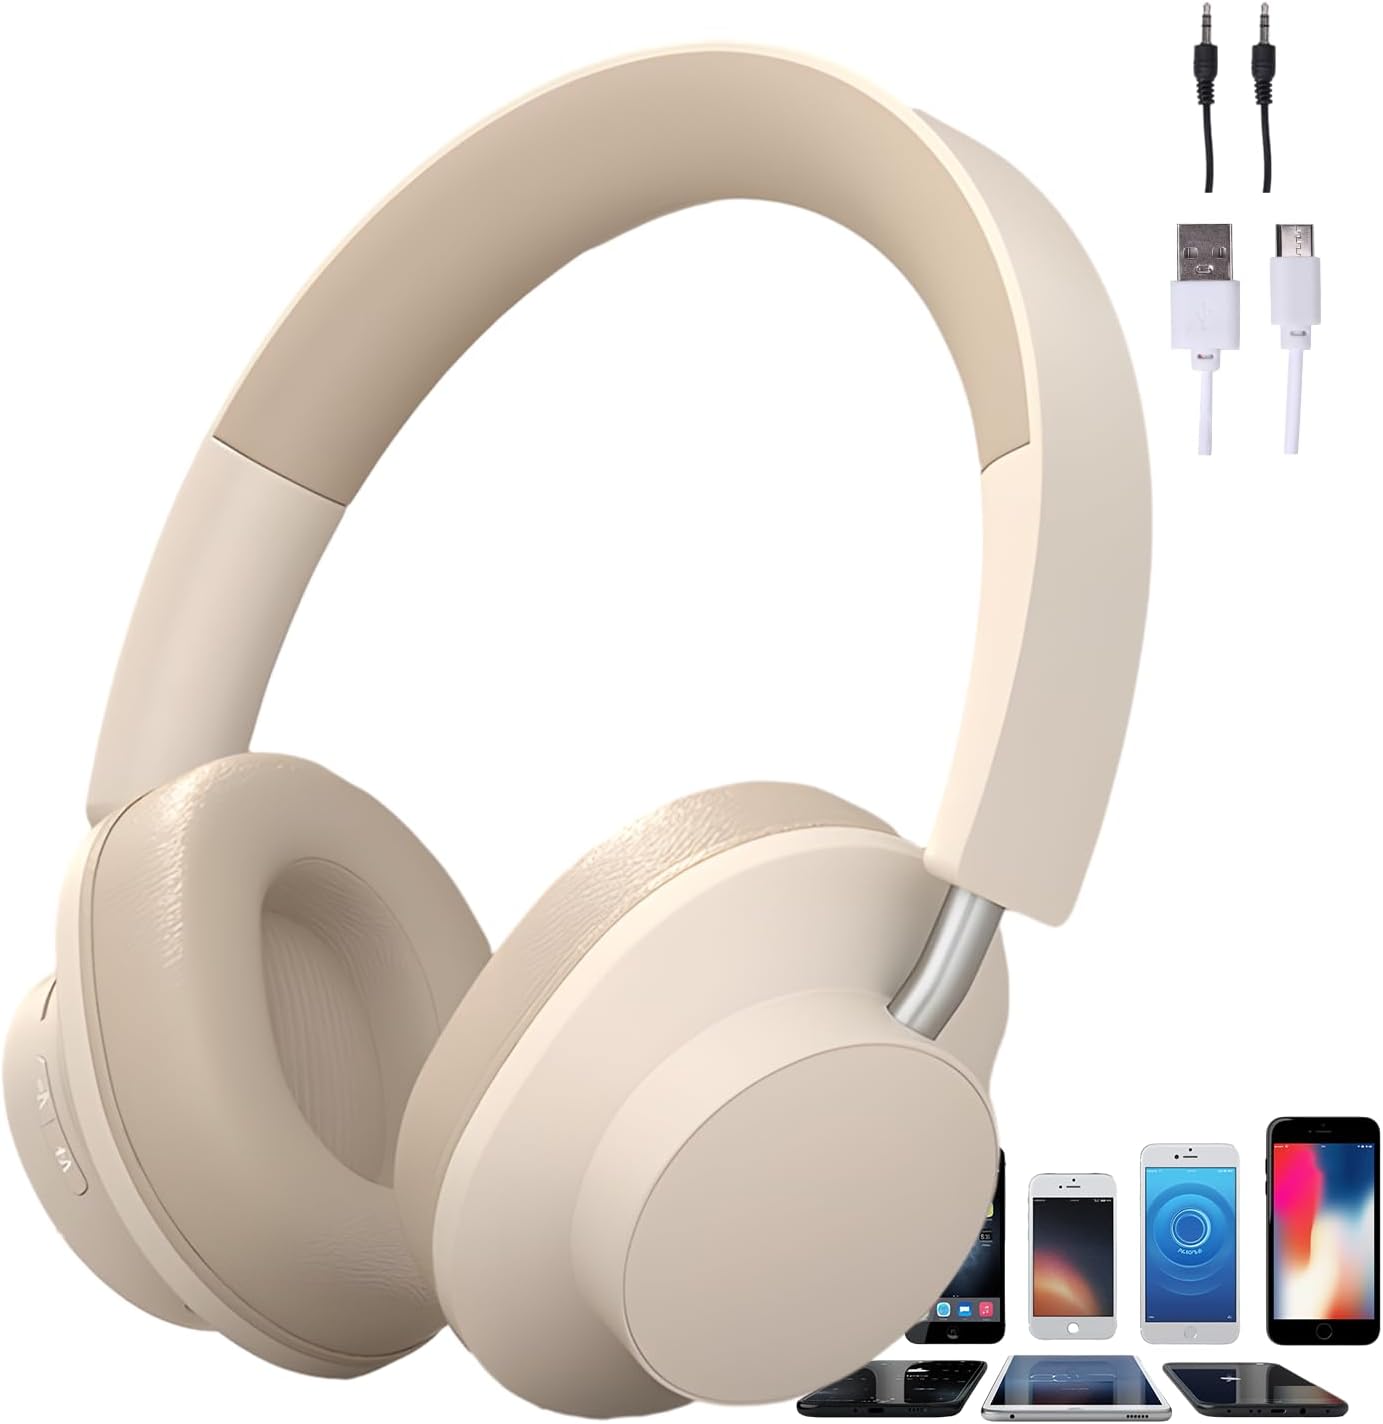 qooarker Over Ear Headphones with Mic, 50 Hours Play Time Wireless Bluetooth Headphones with Deep Bass, Stretchable Headphones with HiFi Audio for Music